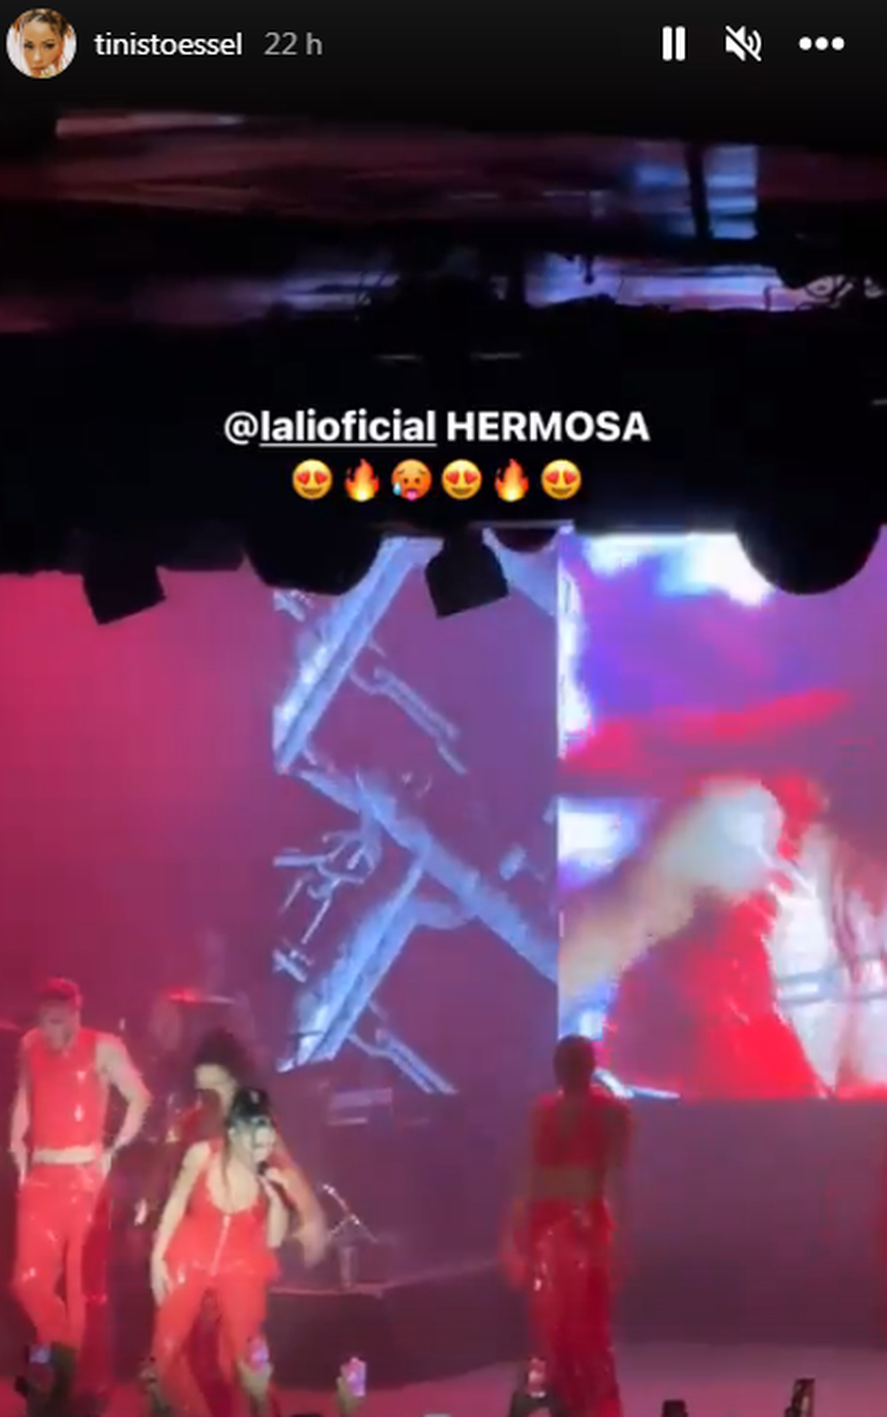 Tini was present at Lali's show in Spain